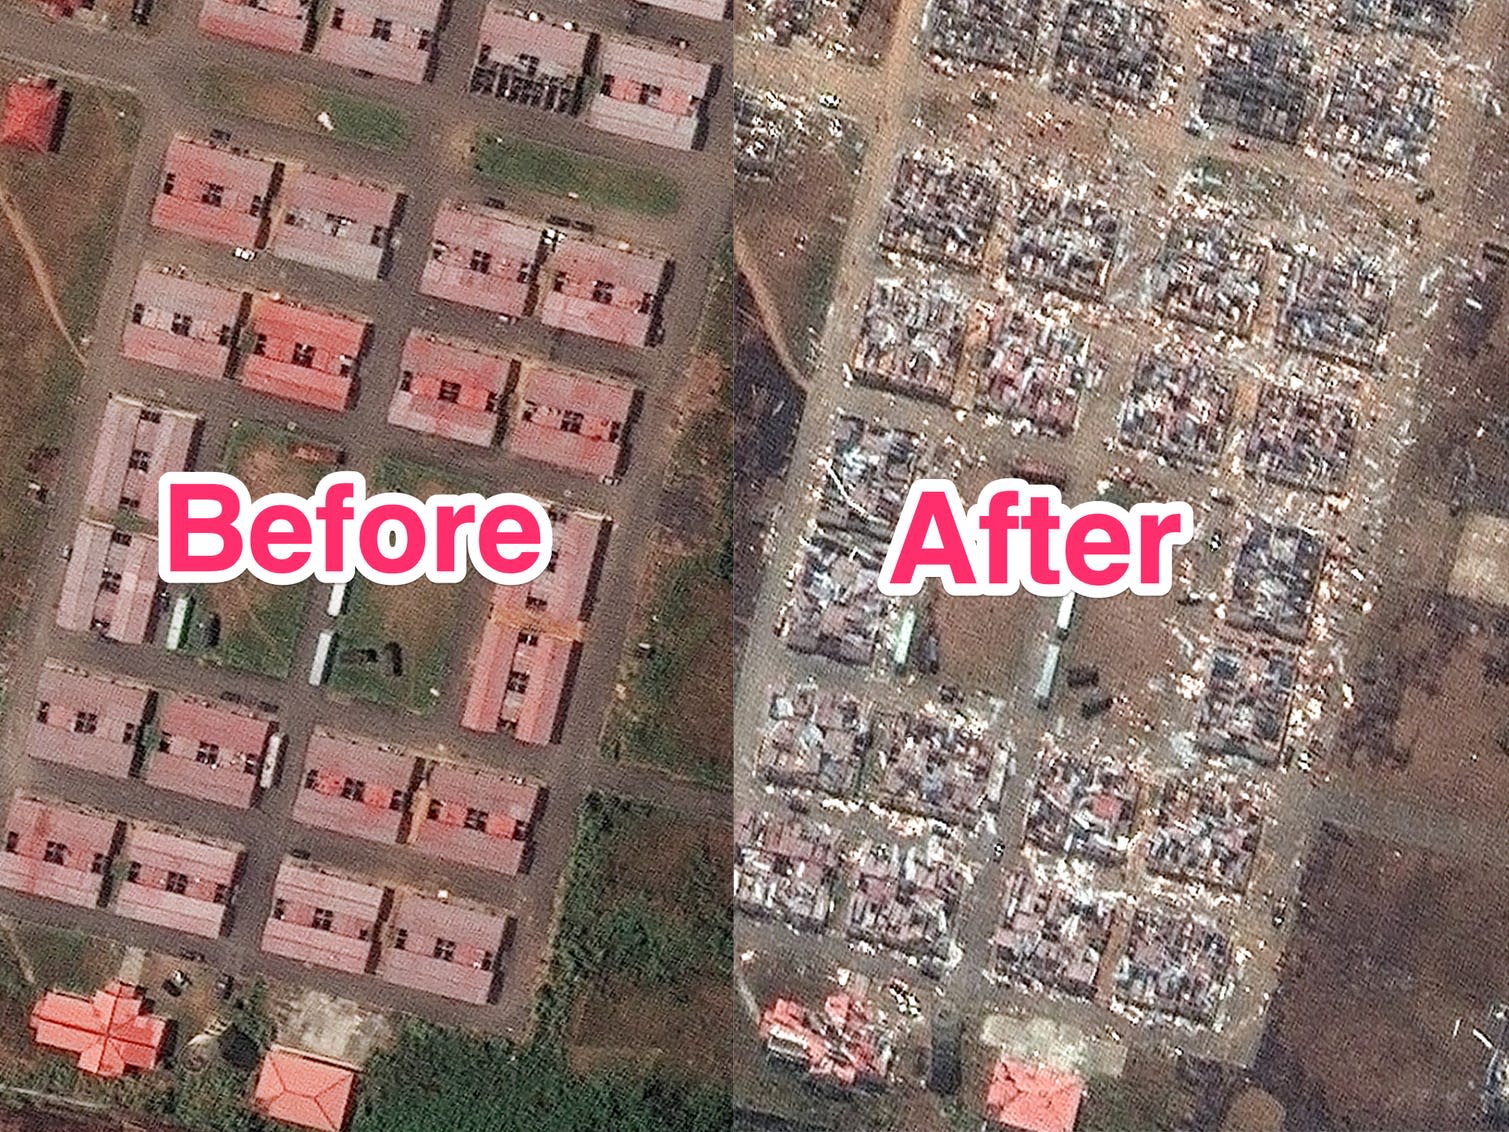 These before and after aerial shots show the devastation left behind by the massive explosion of the military complex in Equatorial Guinea